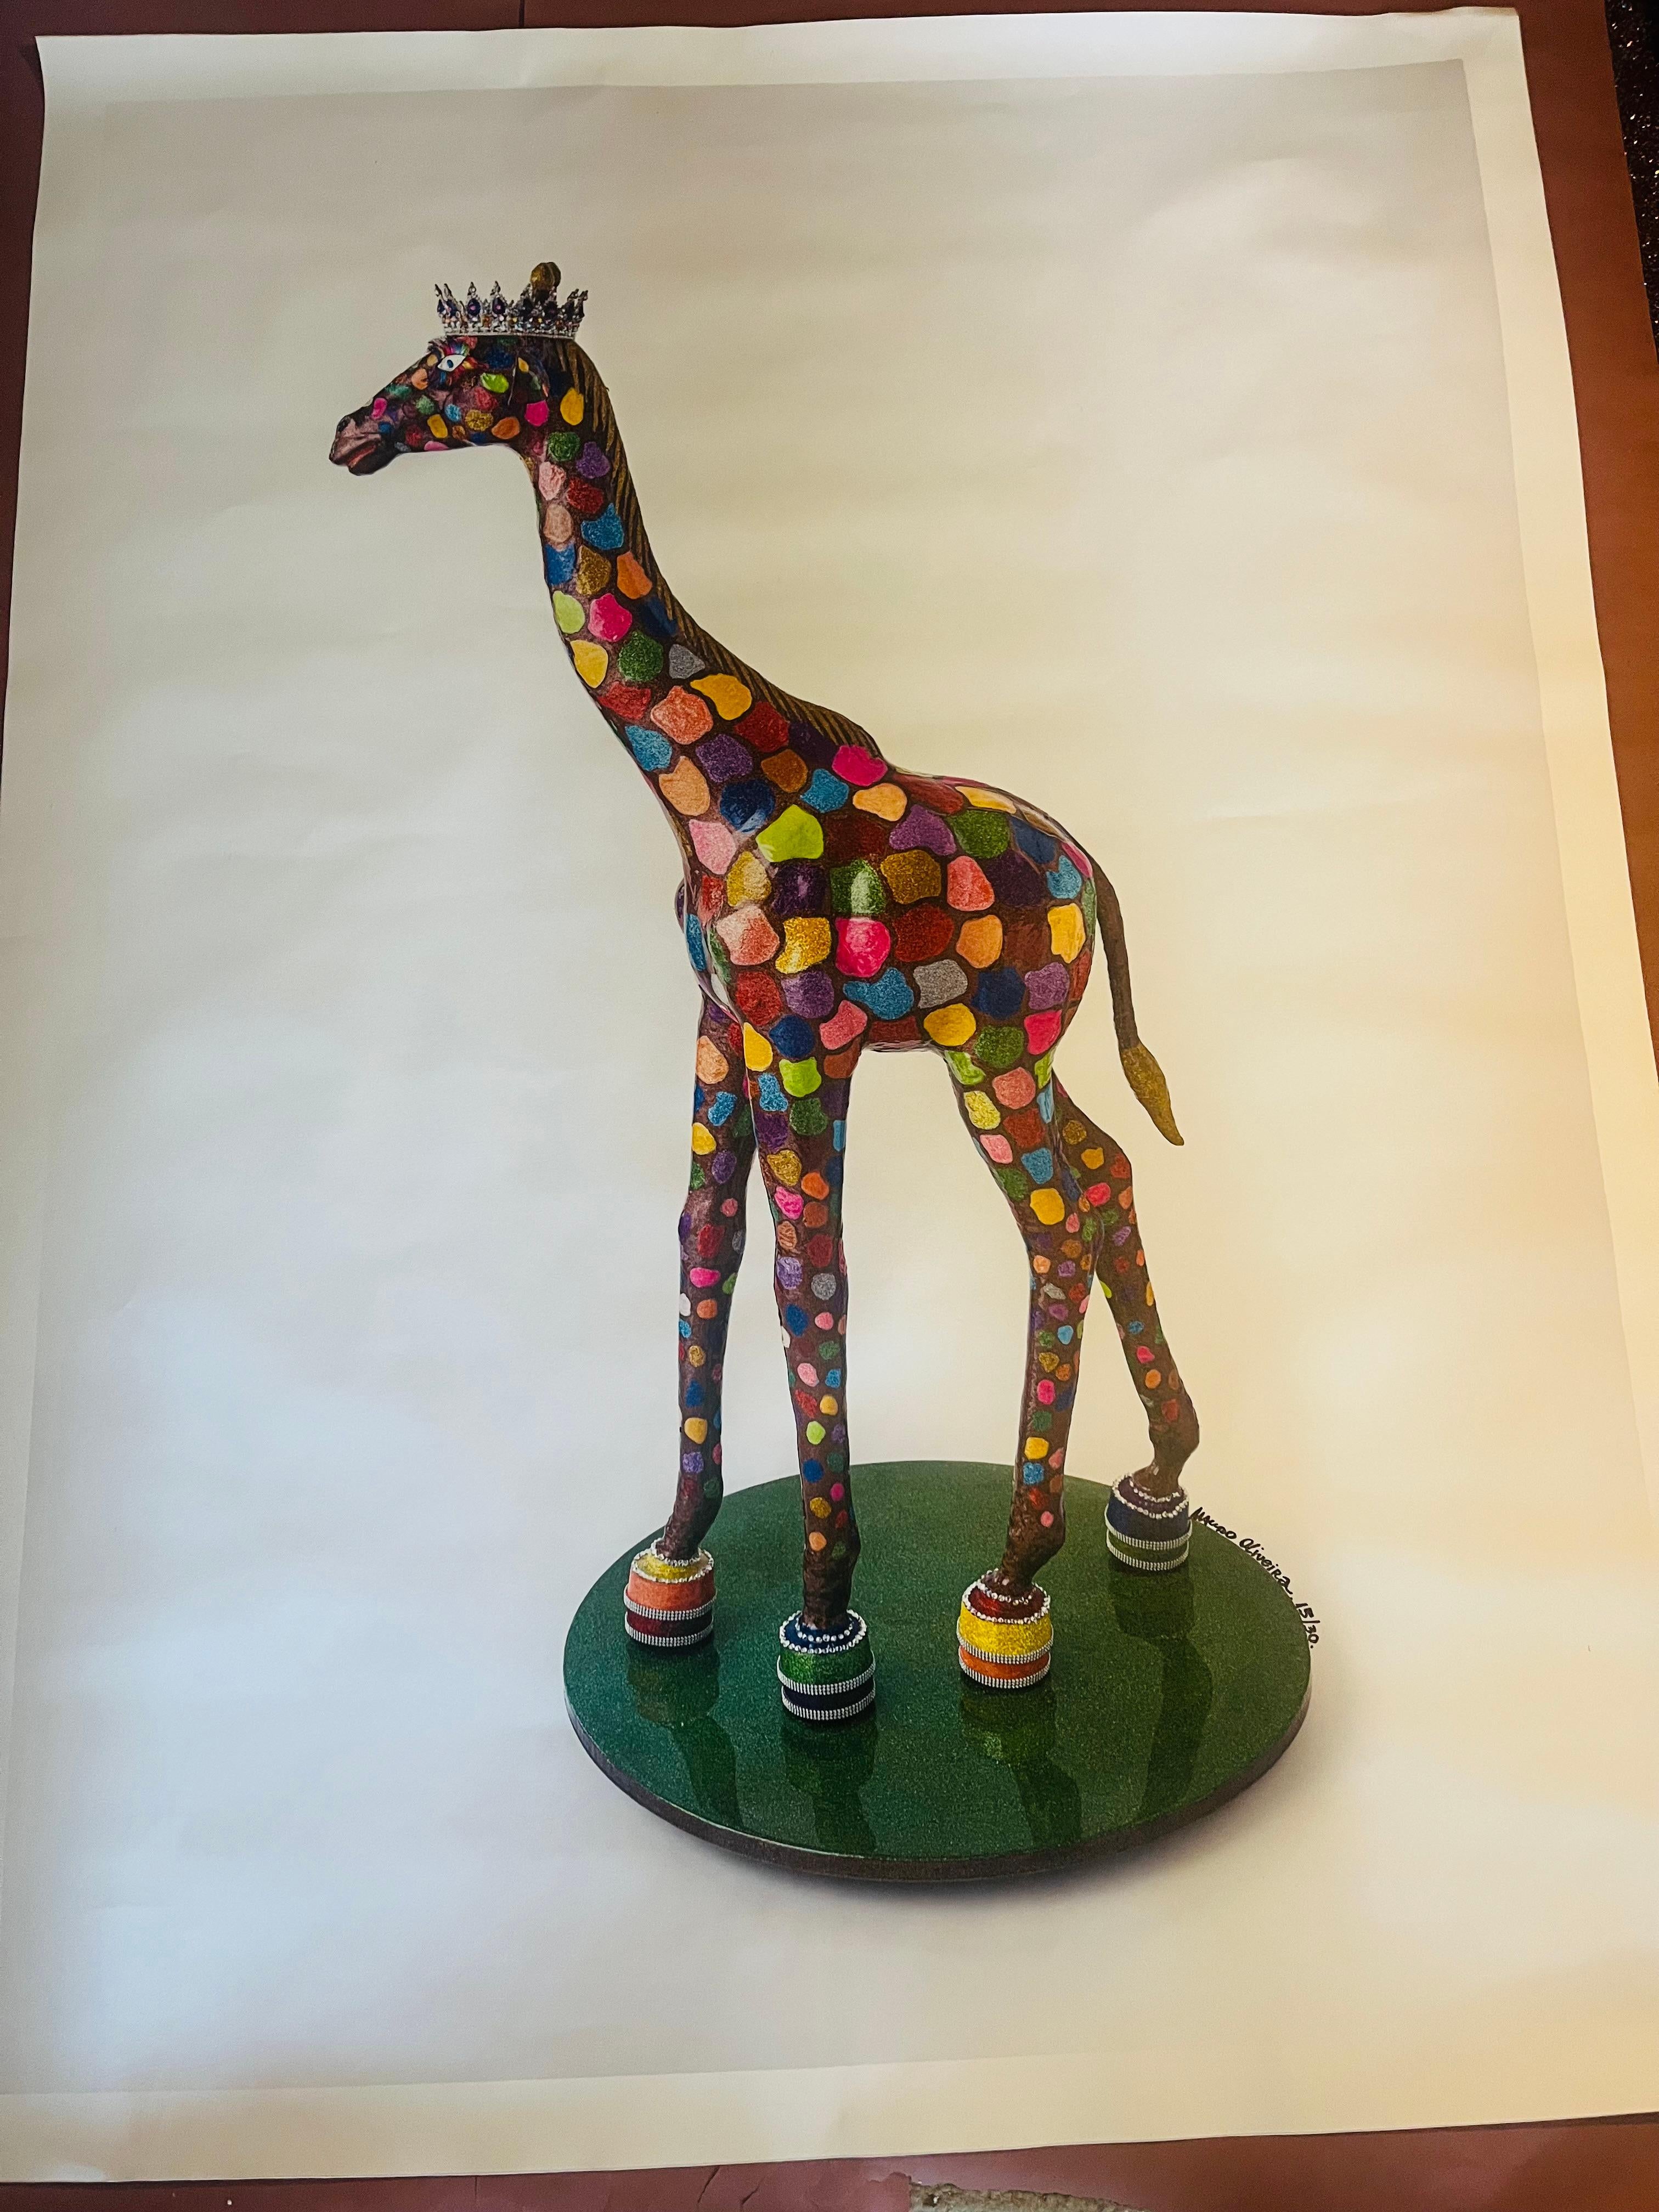               **ANNUAL SUPER SALE UNTIL JUNE 15TH ONLY**
*This Price Won't Be Repeated Again This Year-Take Advantage Of It*

GIGI: Serengeti Dancing Queen is a very special giraffe sculpture that was sold even before she was done. It took 3 months